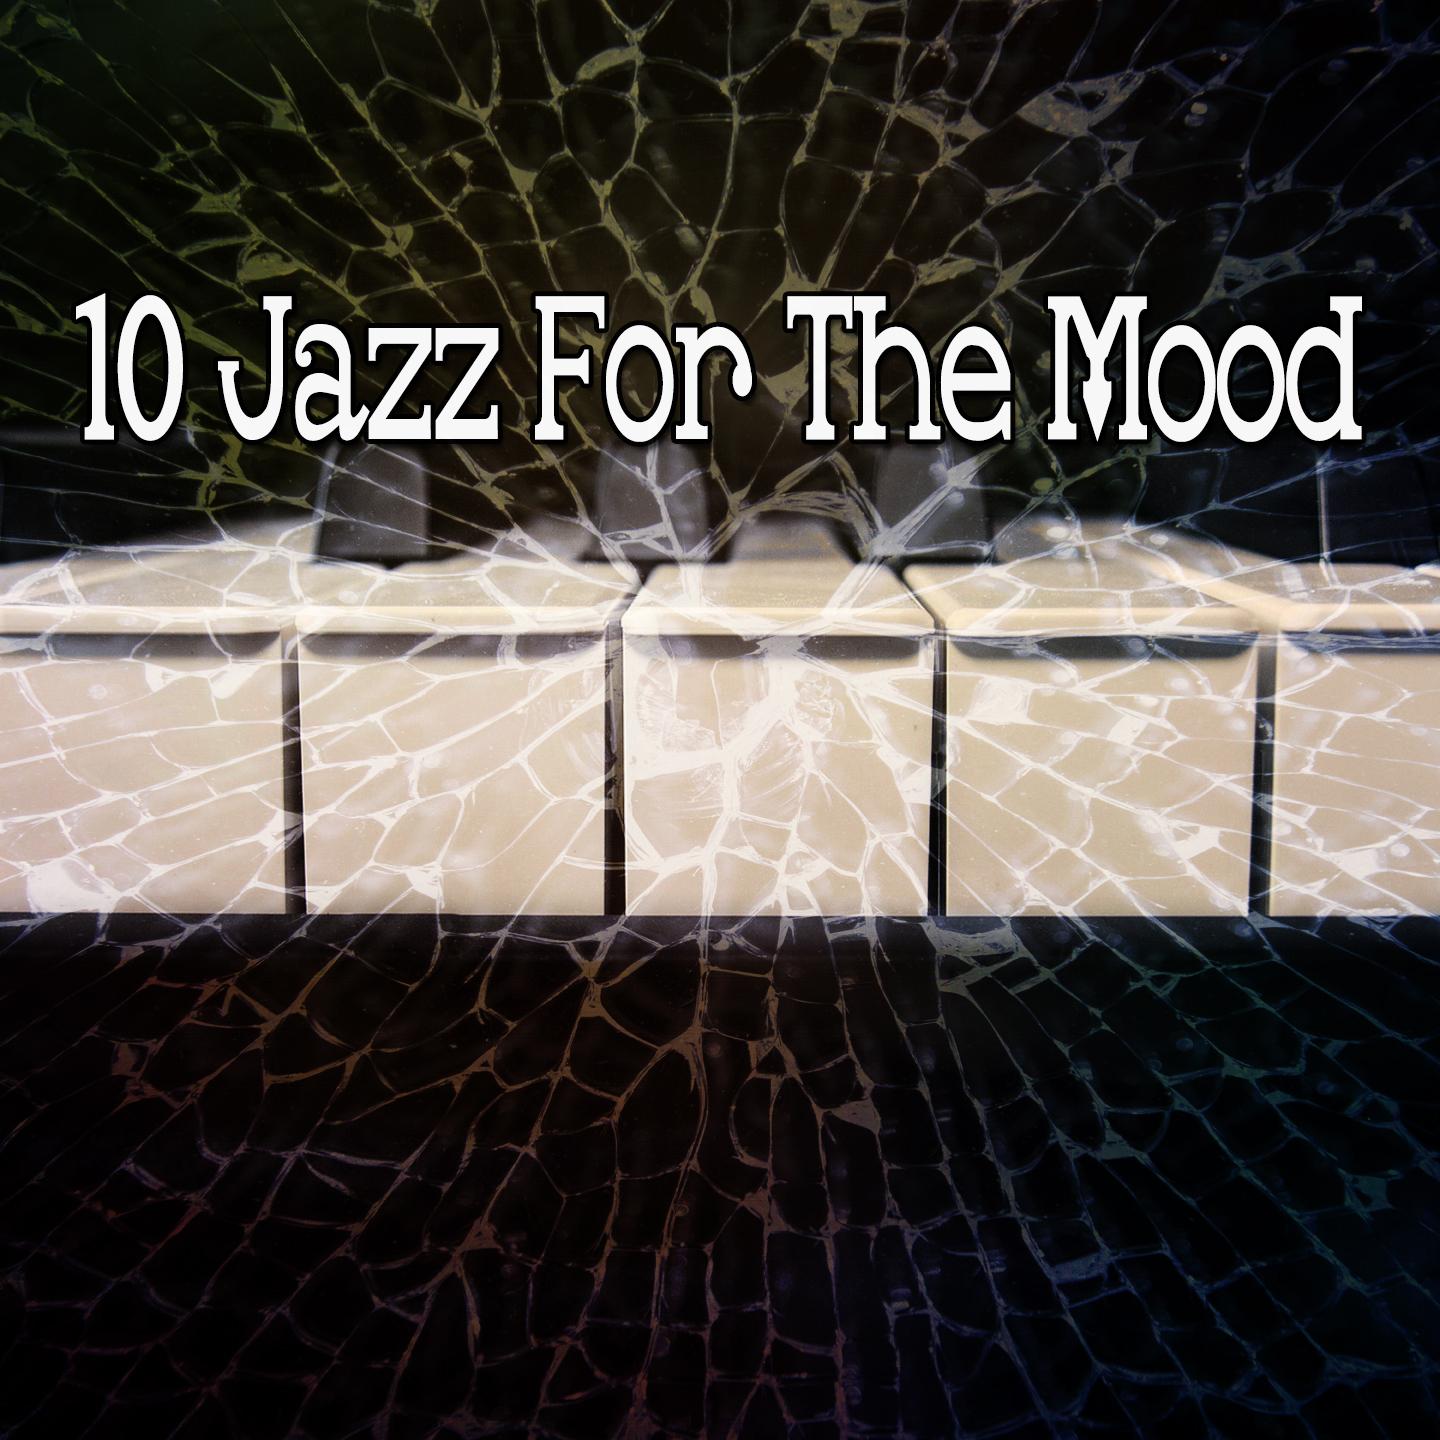 10 Jazz for the Mood